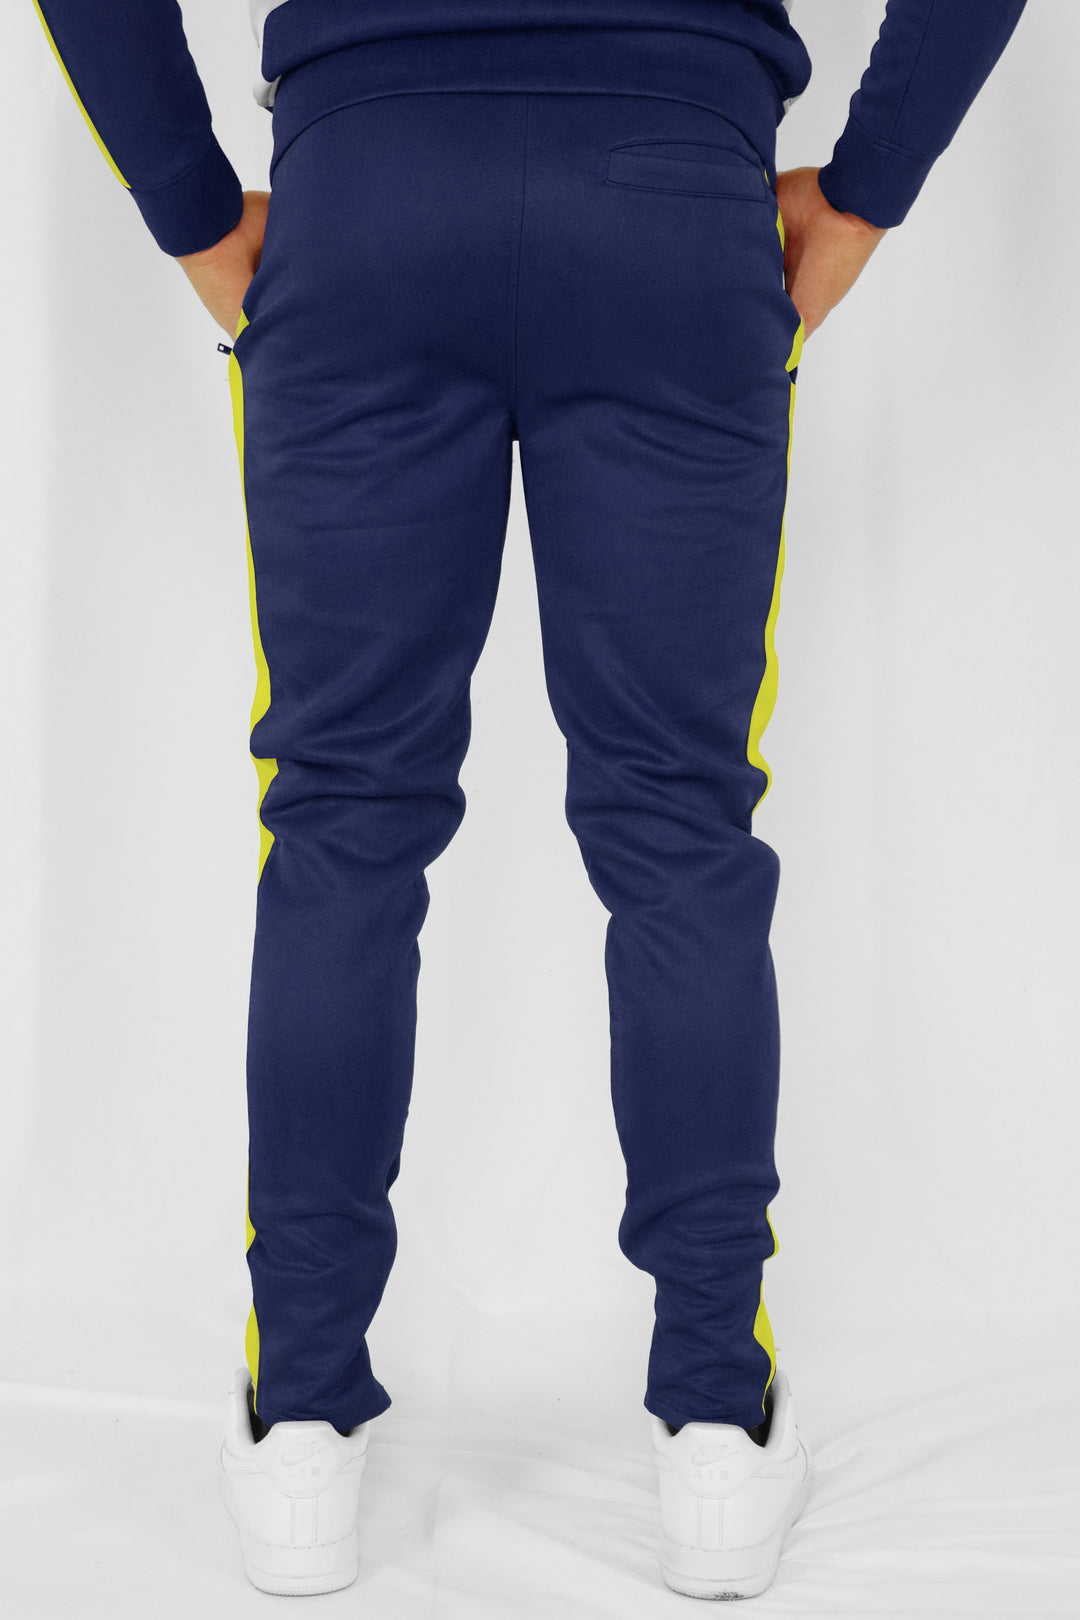 Outside Solid One Stripe Track Pants (Navy - Neon Yellow) - Zamage